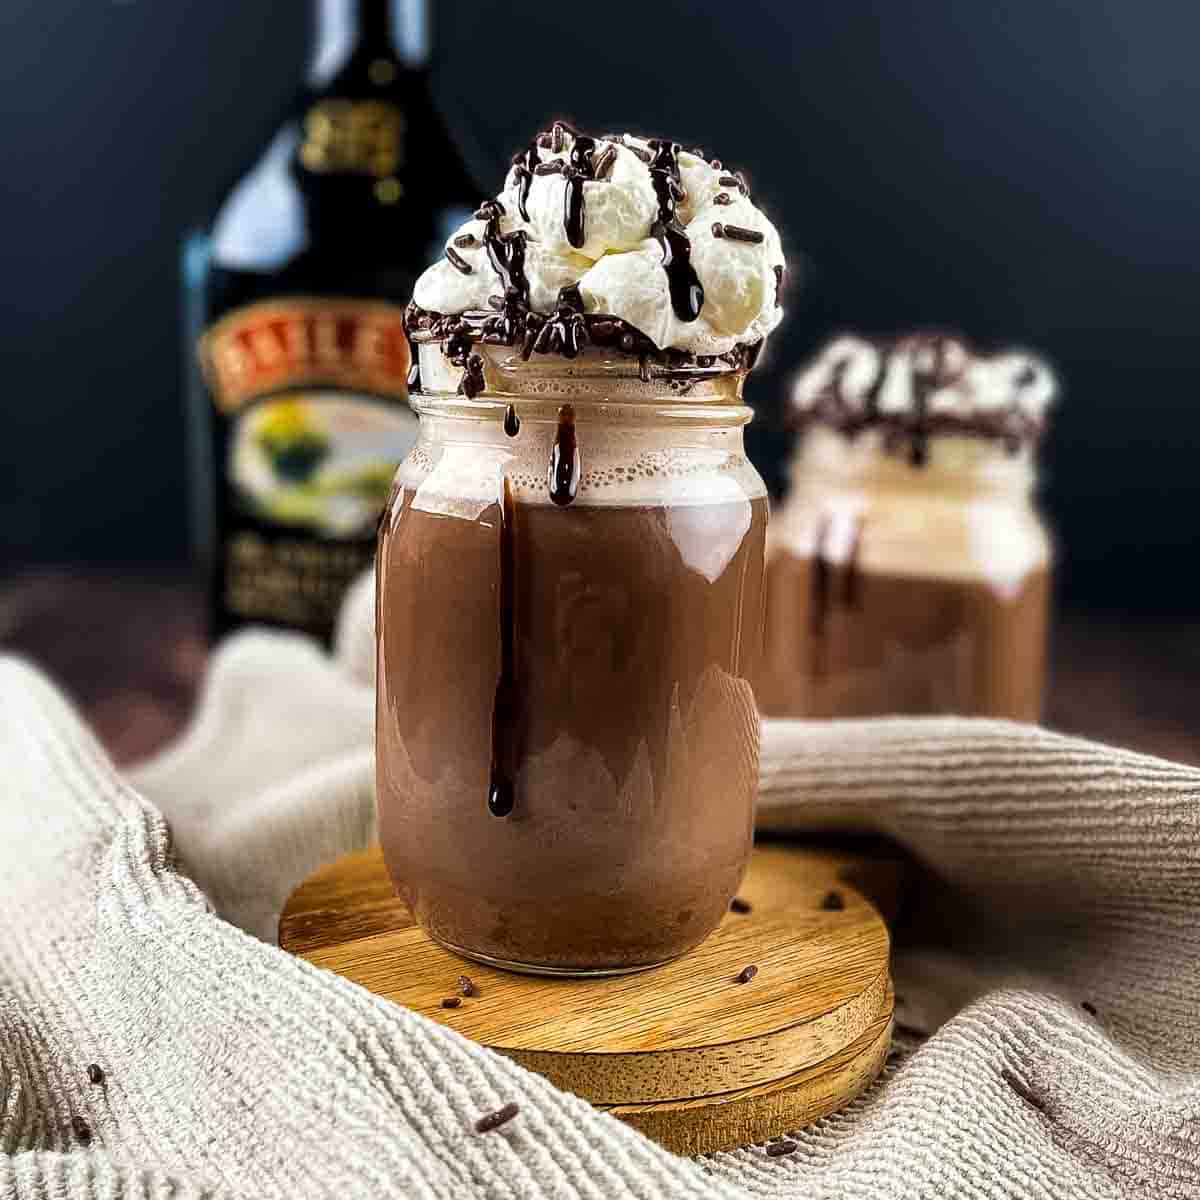 A glass mug filles with the adult hot chocolate topped with whipped cream.